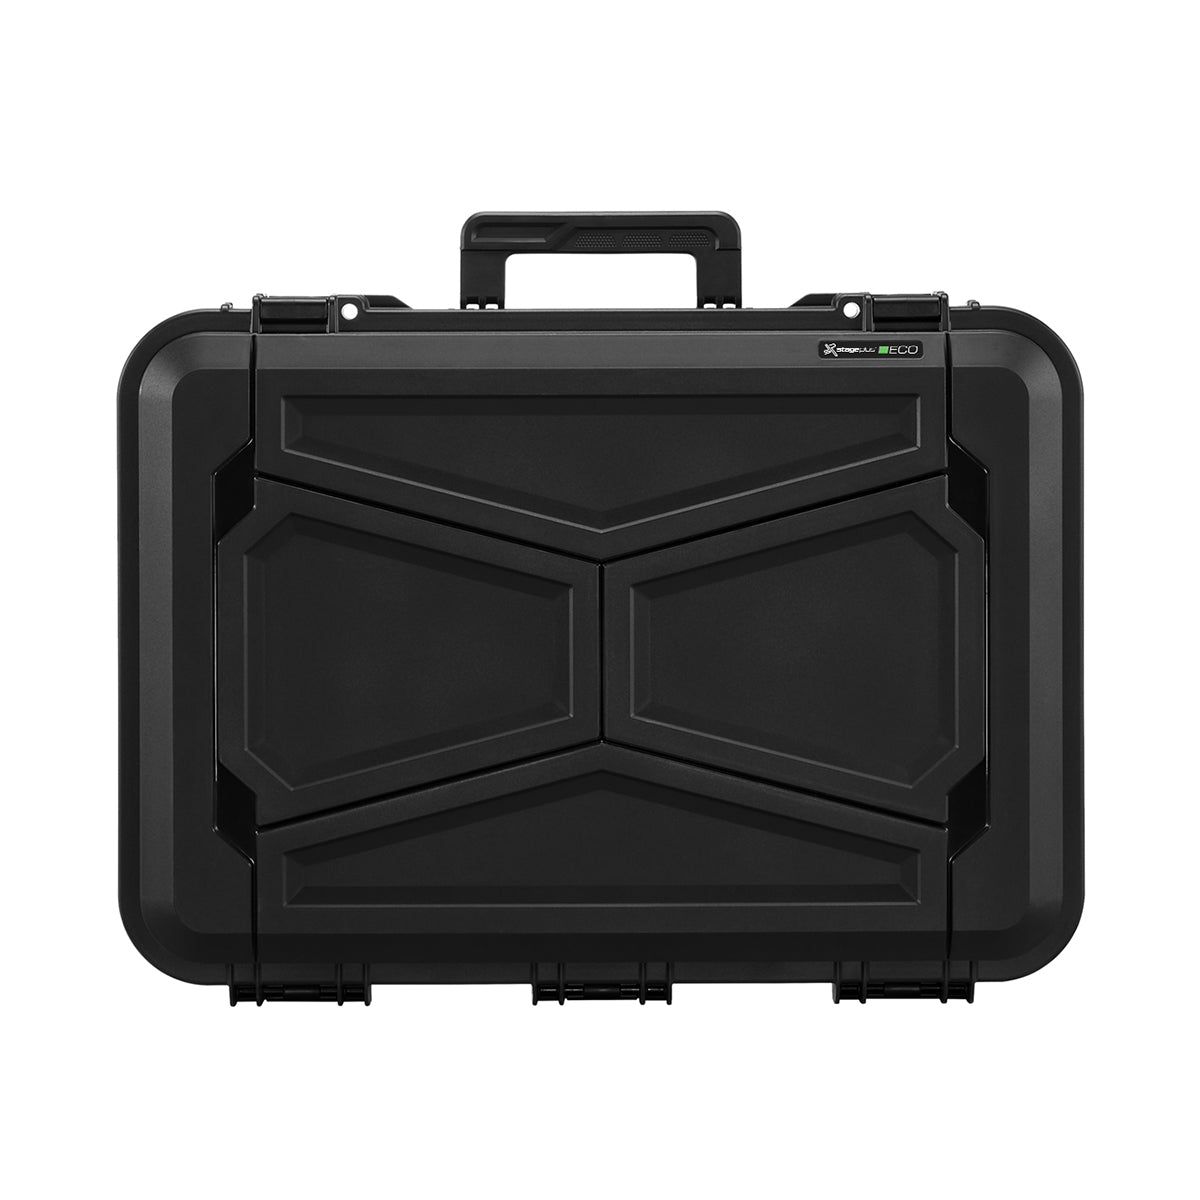 SP ECO 90DS Black Carry Case, Cubed Foam, ID: L520xW350xH220mm